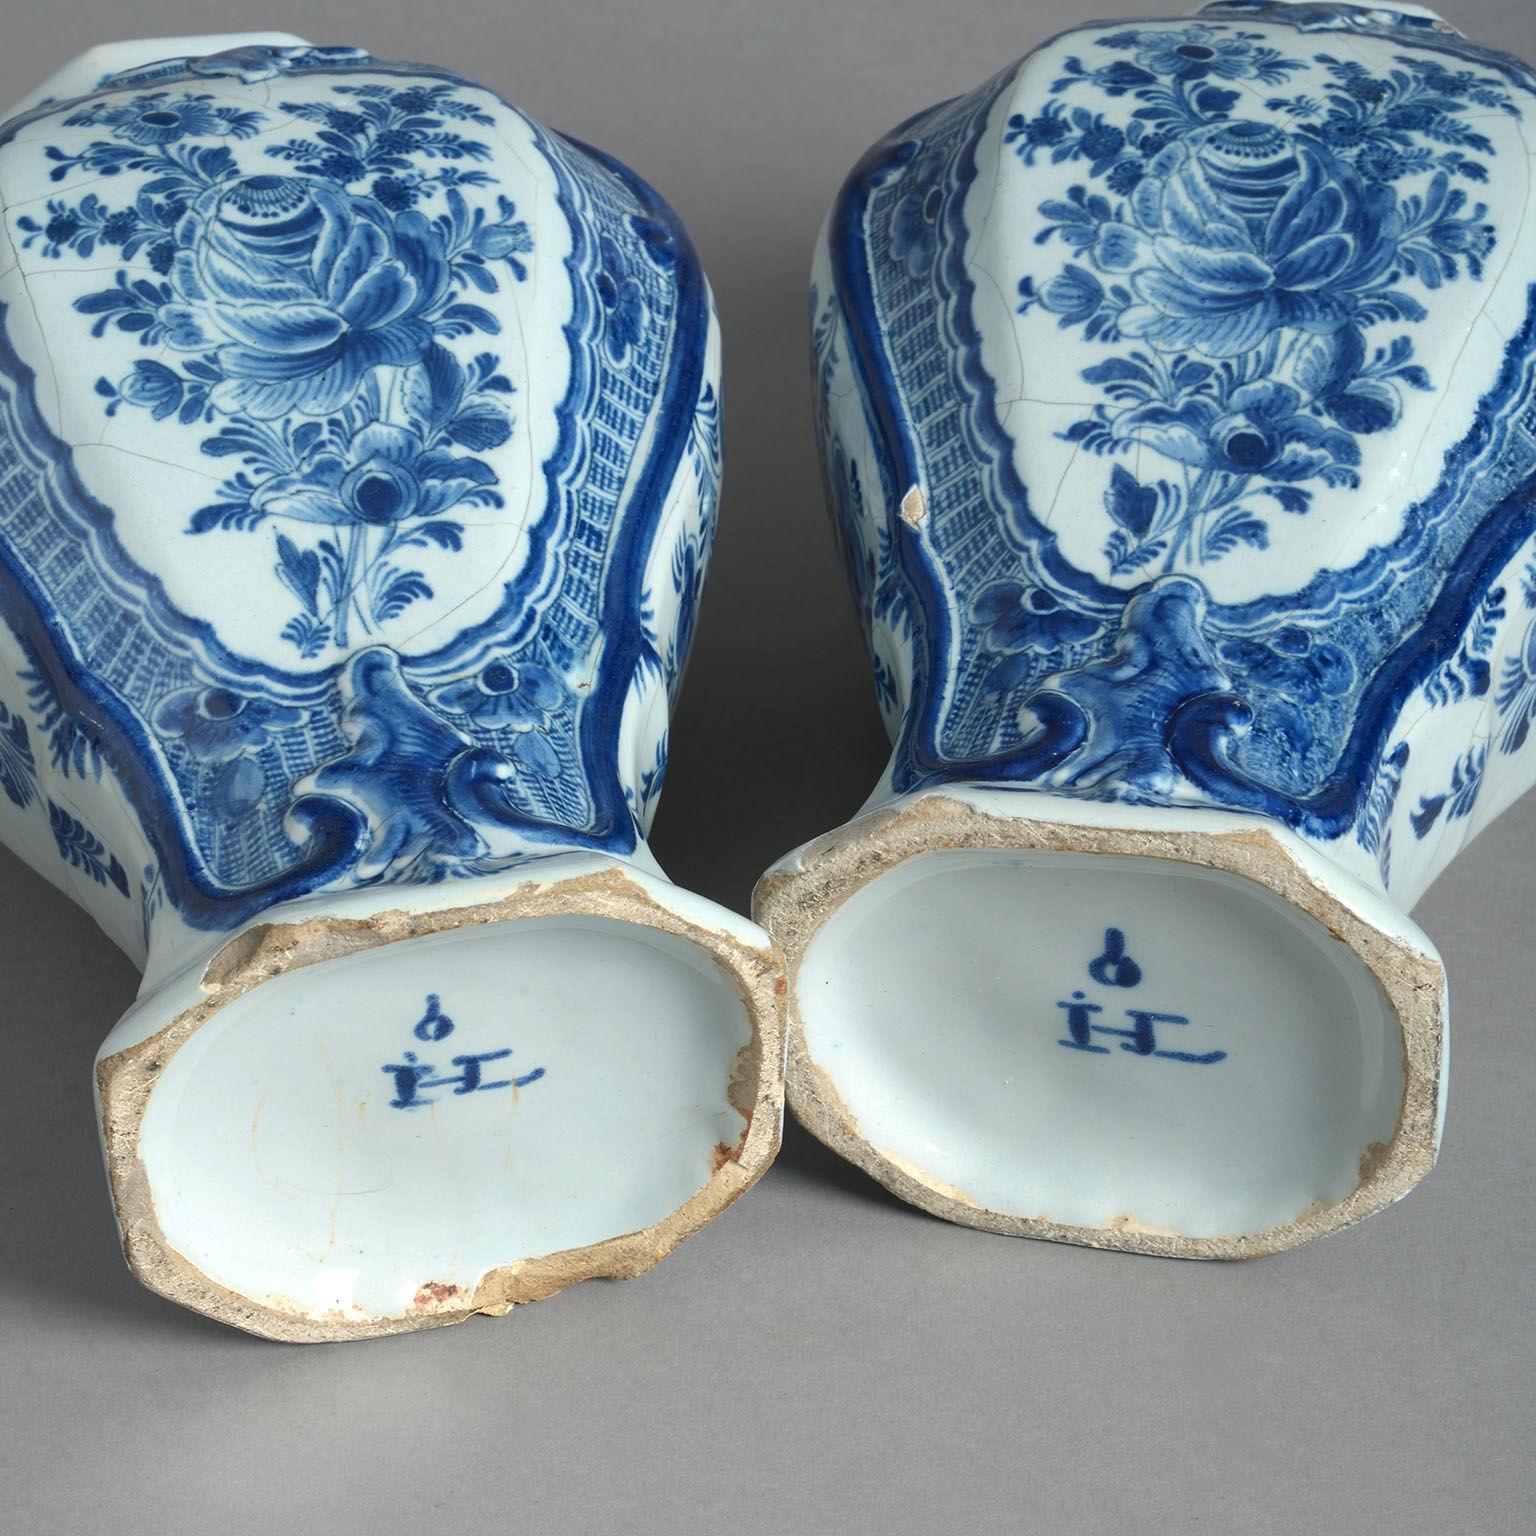 Late 18th Century Pair of Signed 18th Century Delft Lidded Vases